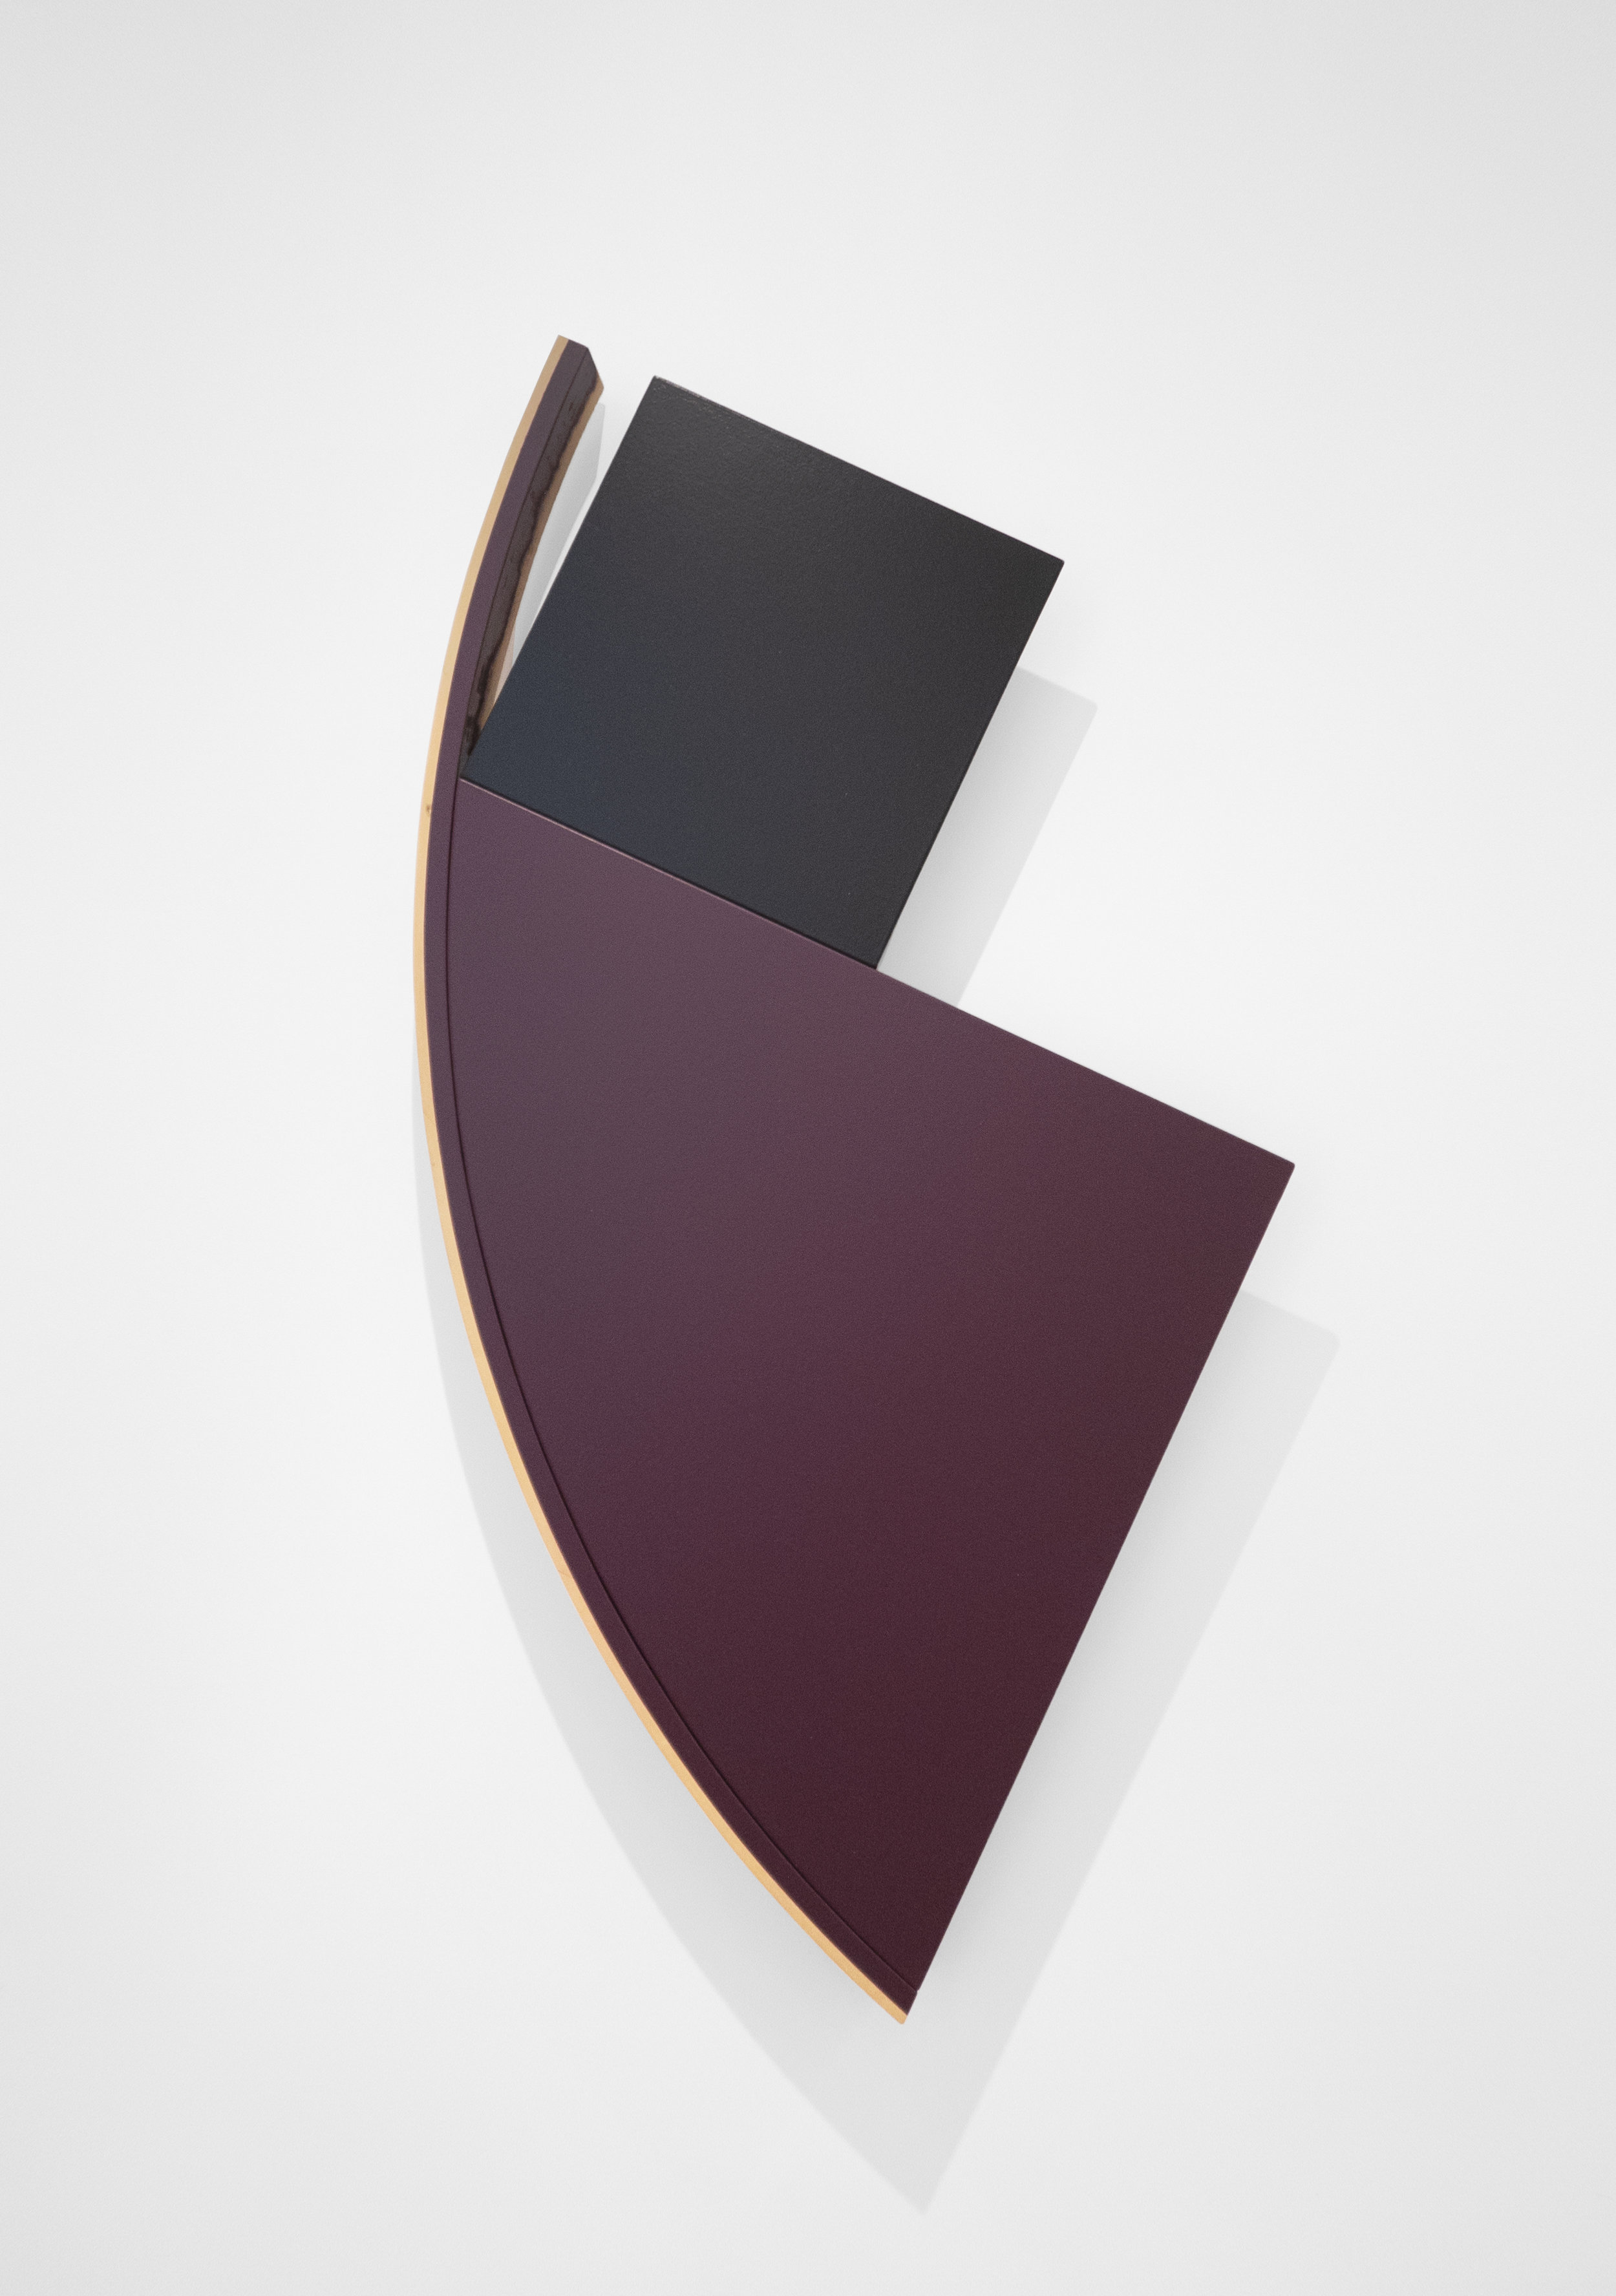  Tony Delap Perplexity 1988 Oil on Canvas on Wood 74 x 38.5 x 4.25 inches 